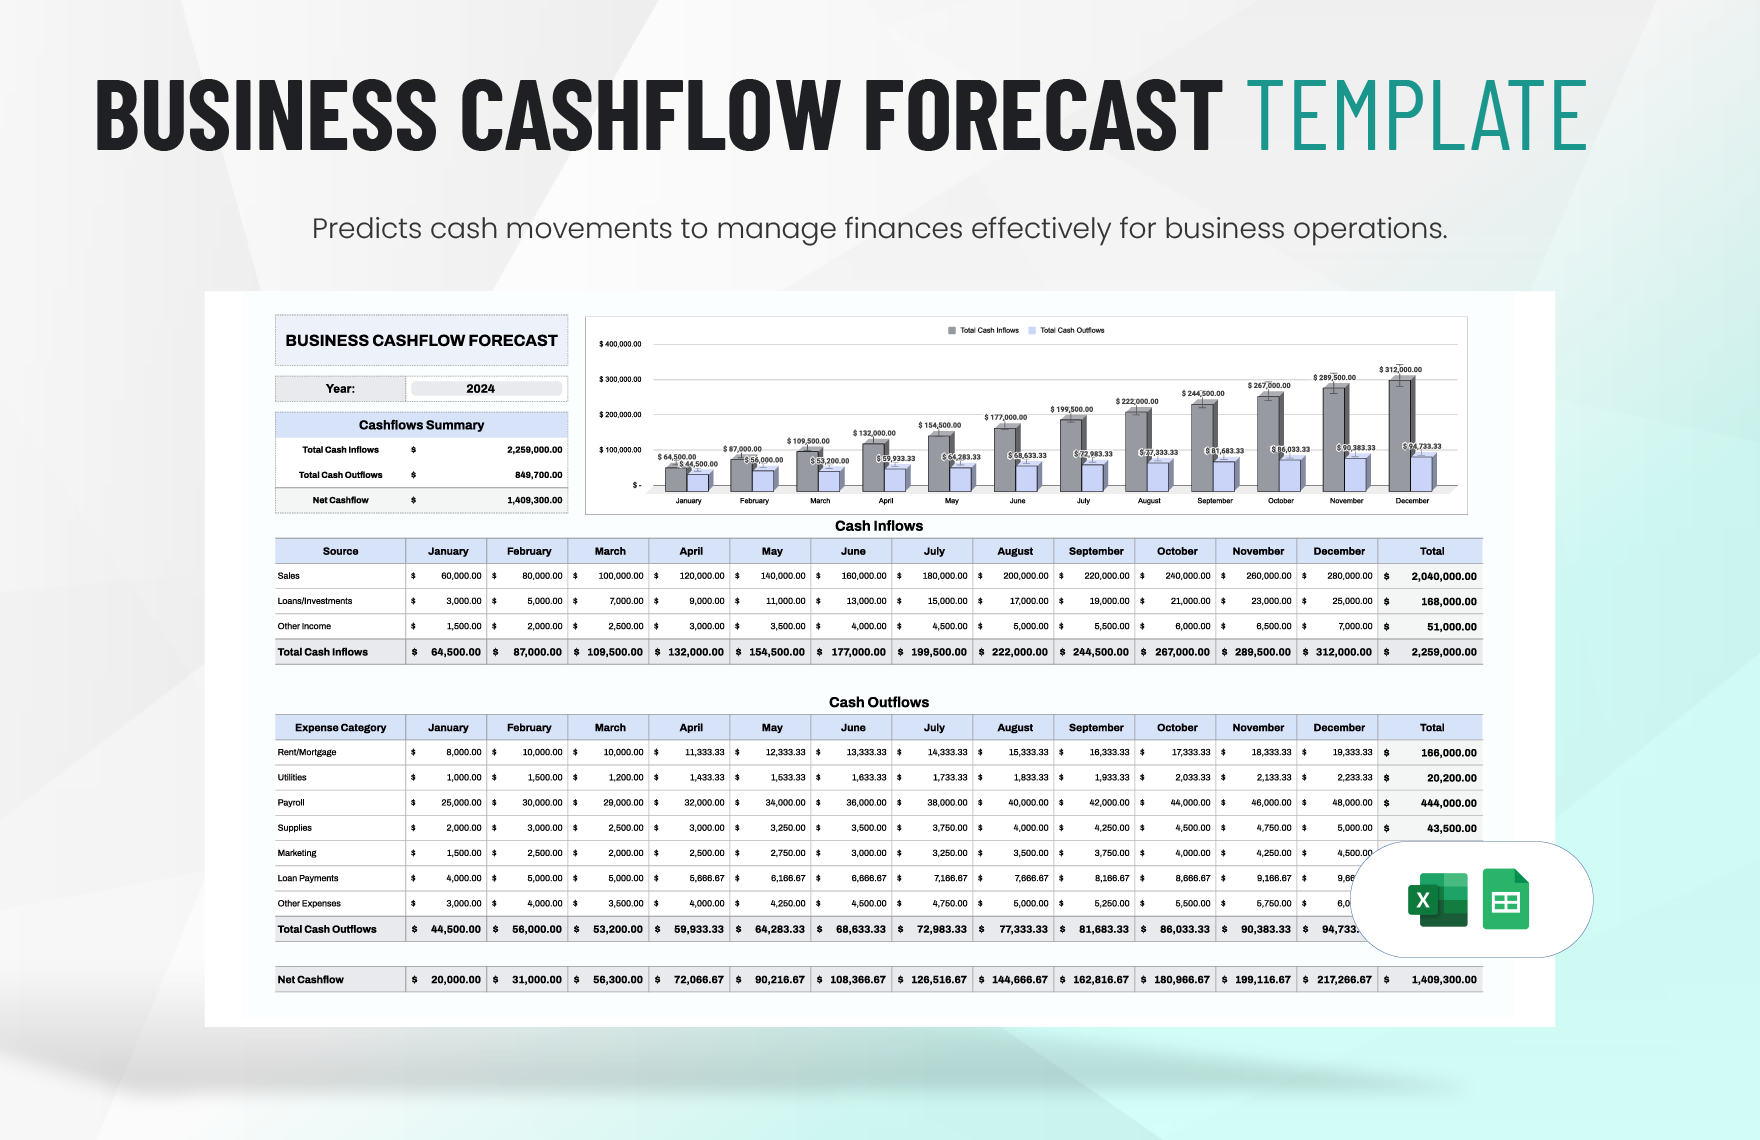 Business Cashflow Forecast Template in Excel, Google Sheets